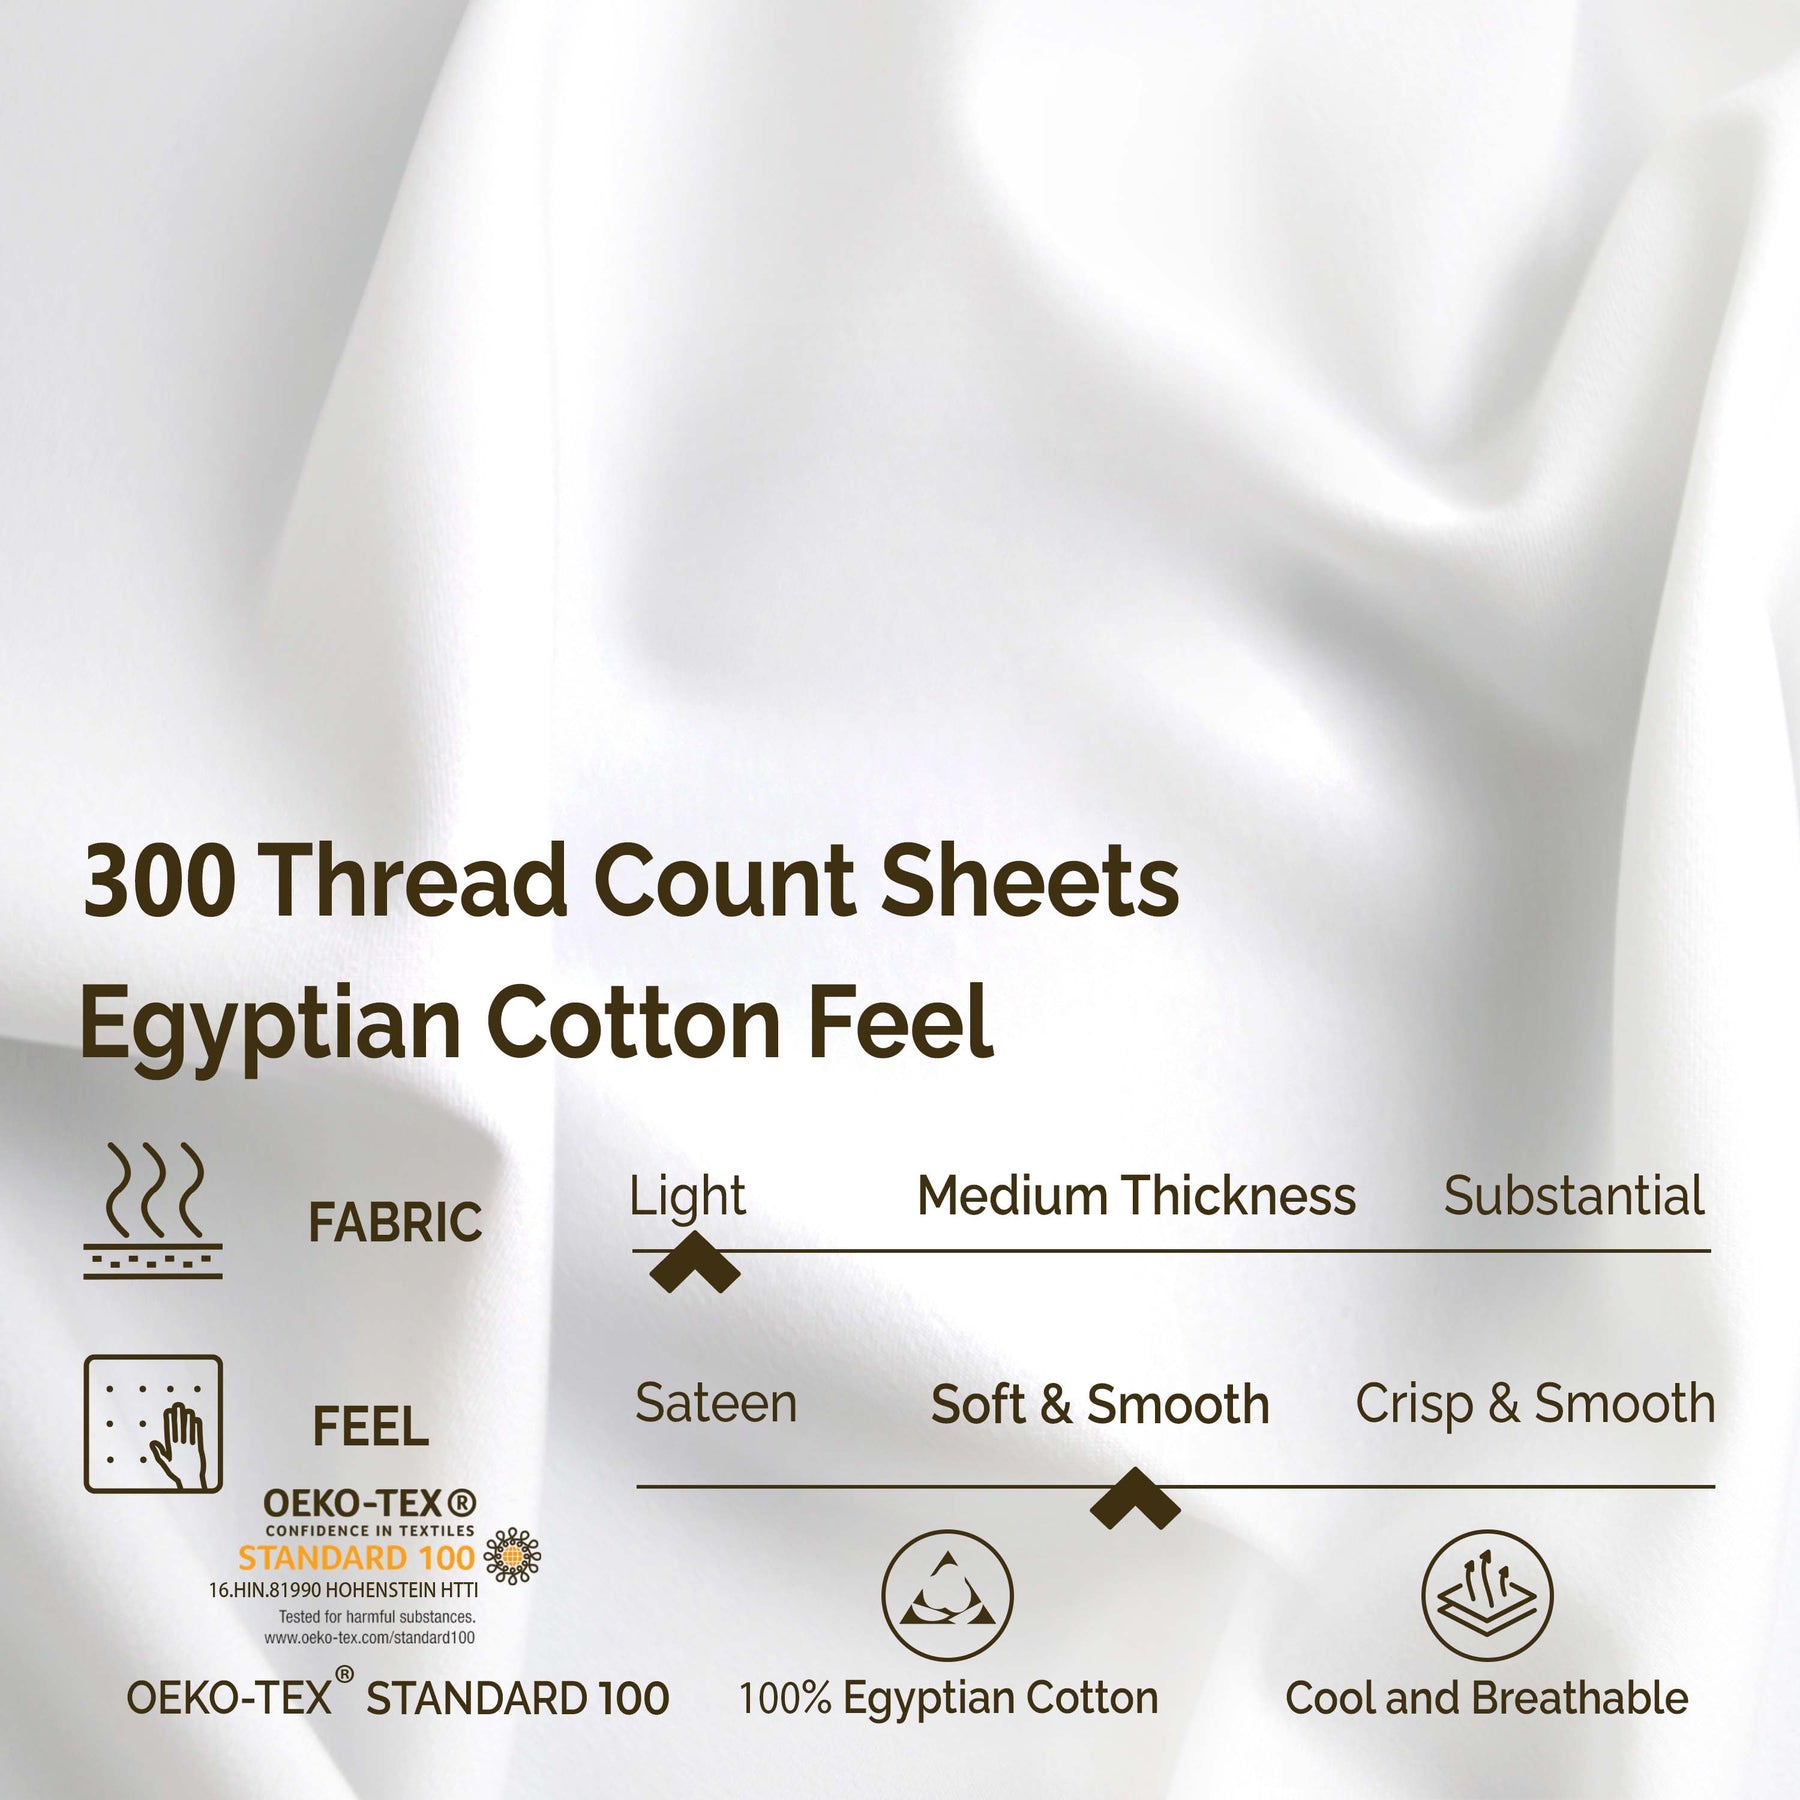 Superior Egyptian Cotton 300 Thread Count Solid Deep Pocket Bed Sheet Set - White